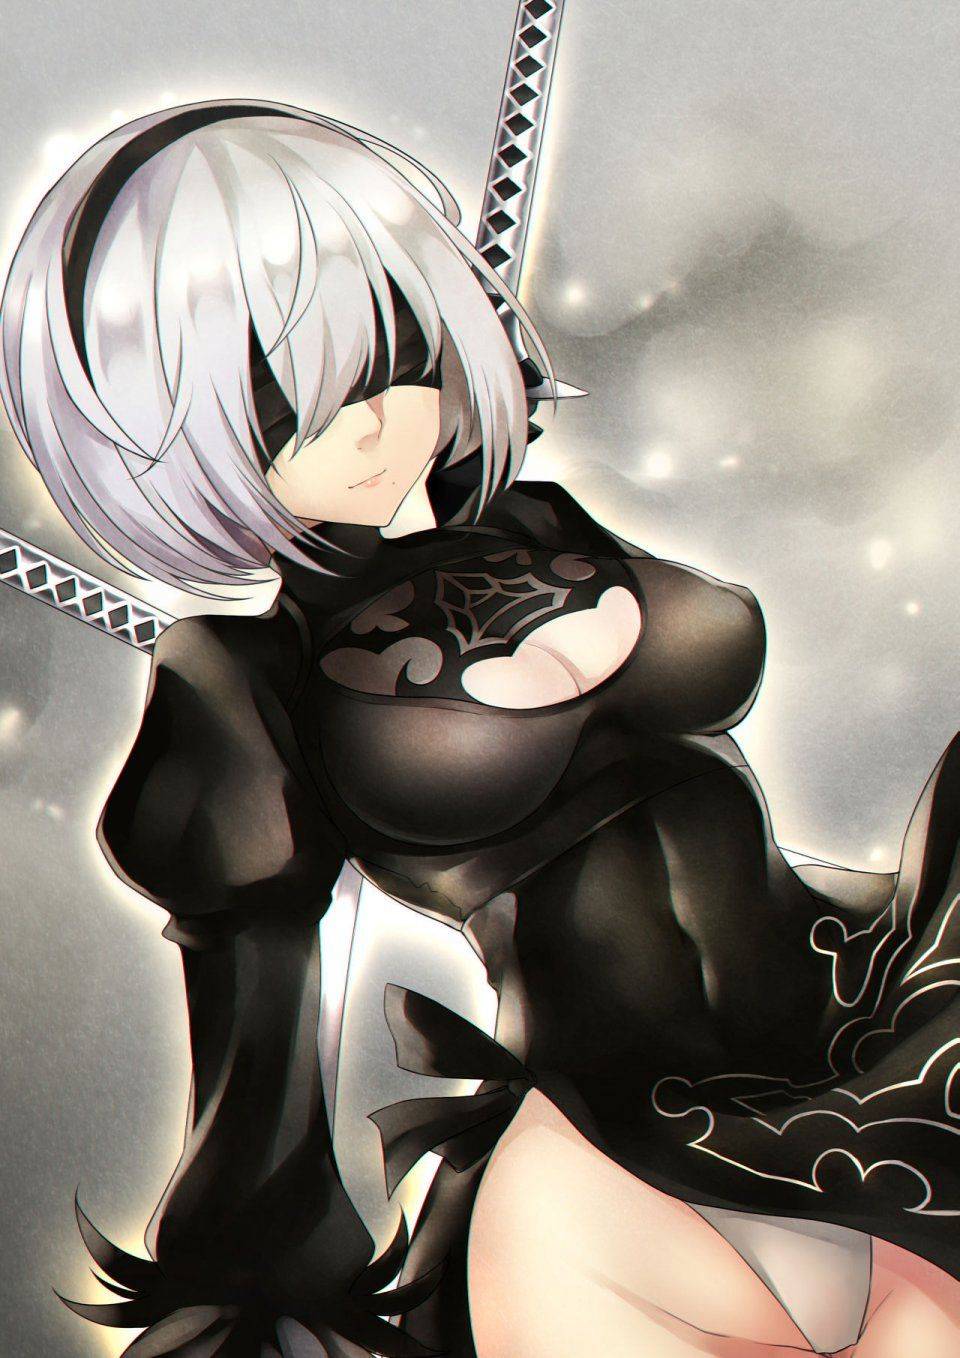 Collection - 2B - Photo #248